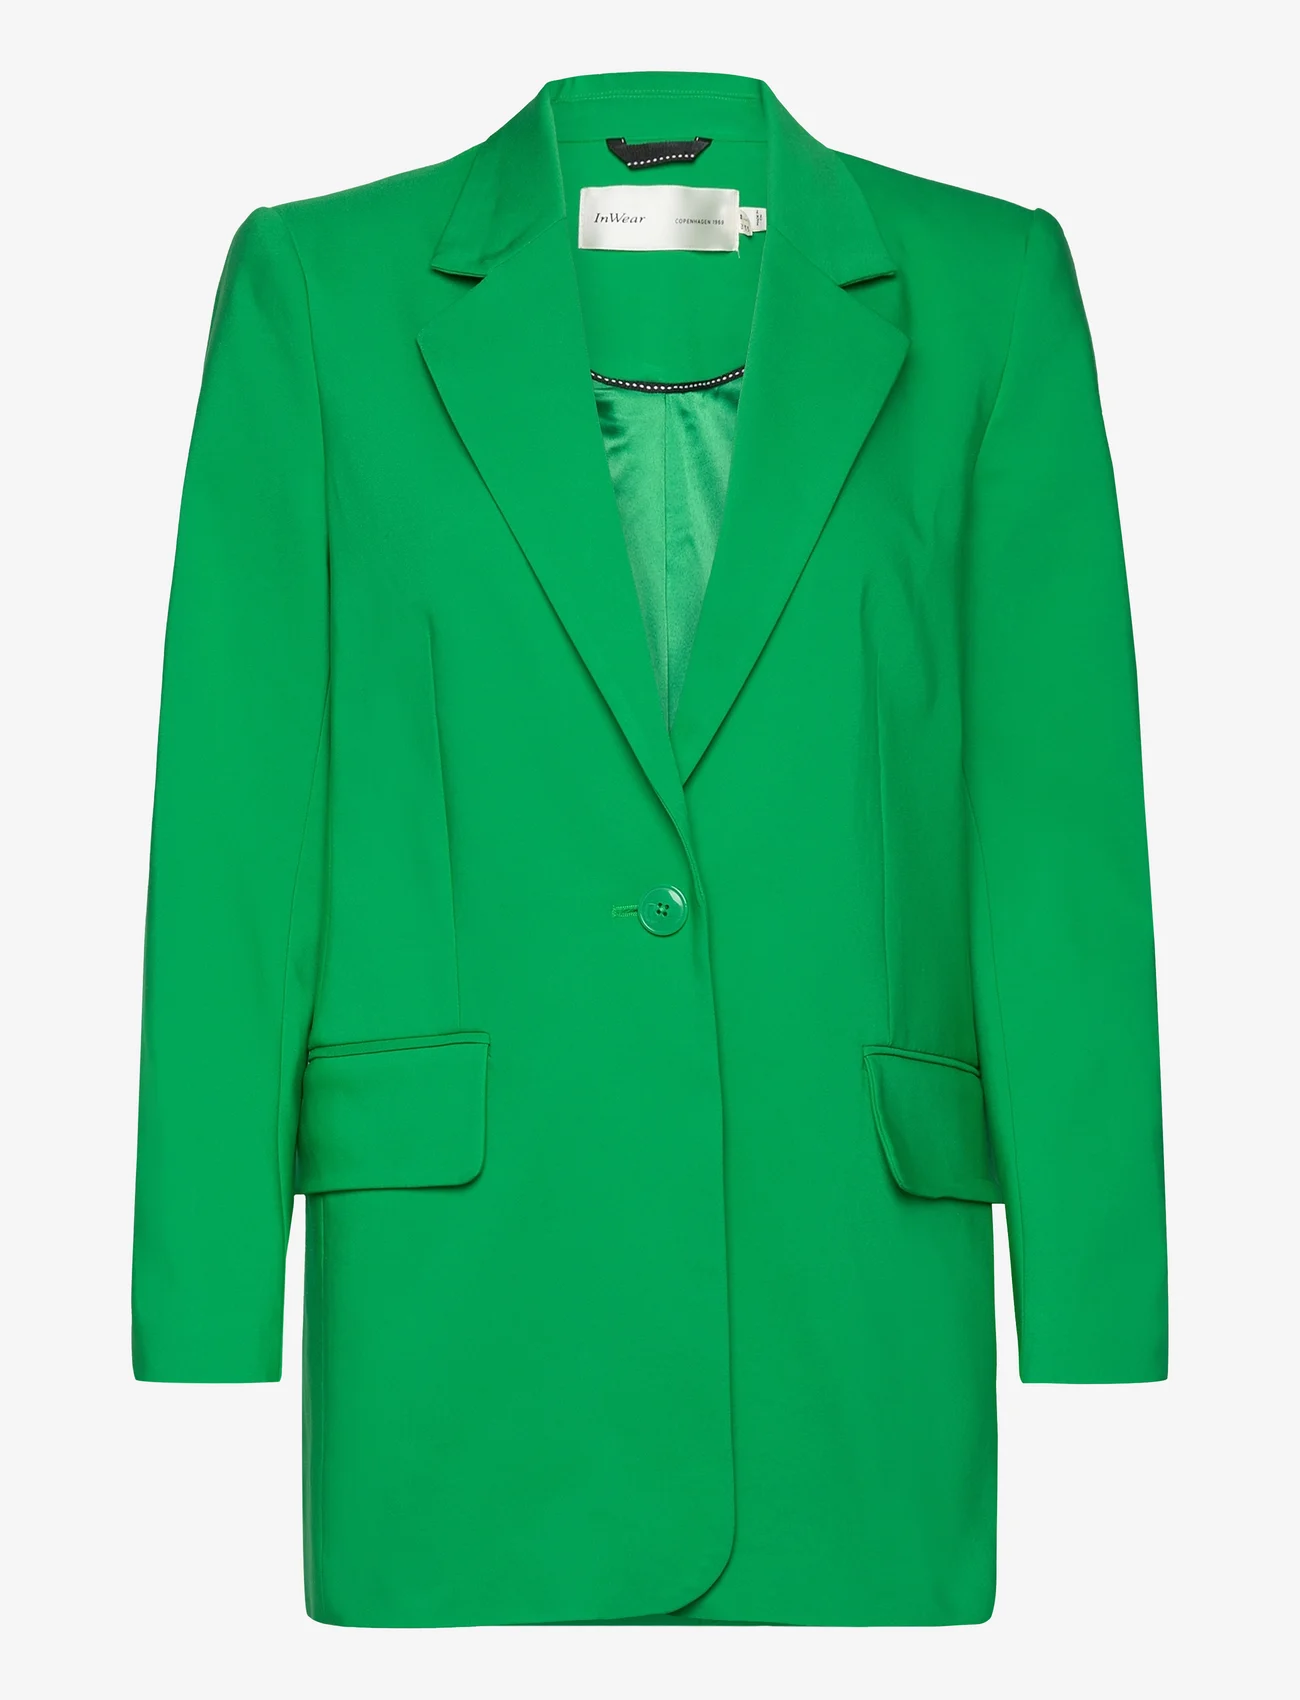 InWear - ZellaIW Long Blazer - party wear at outlet prices - bright green - 0